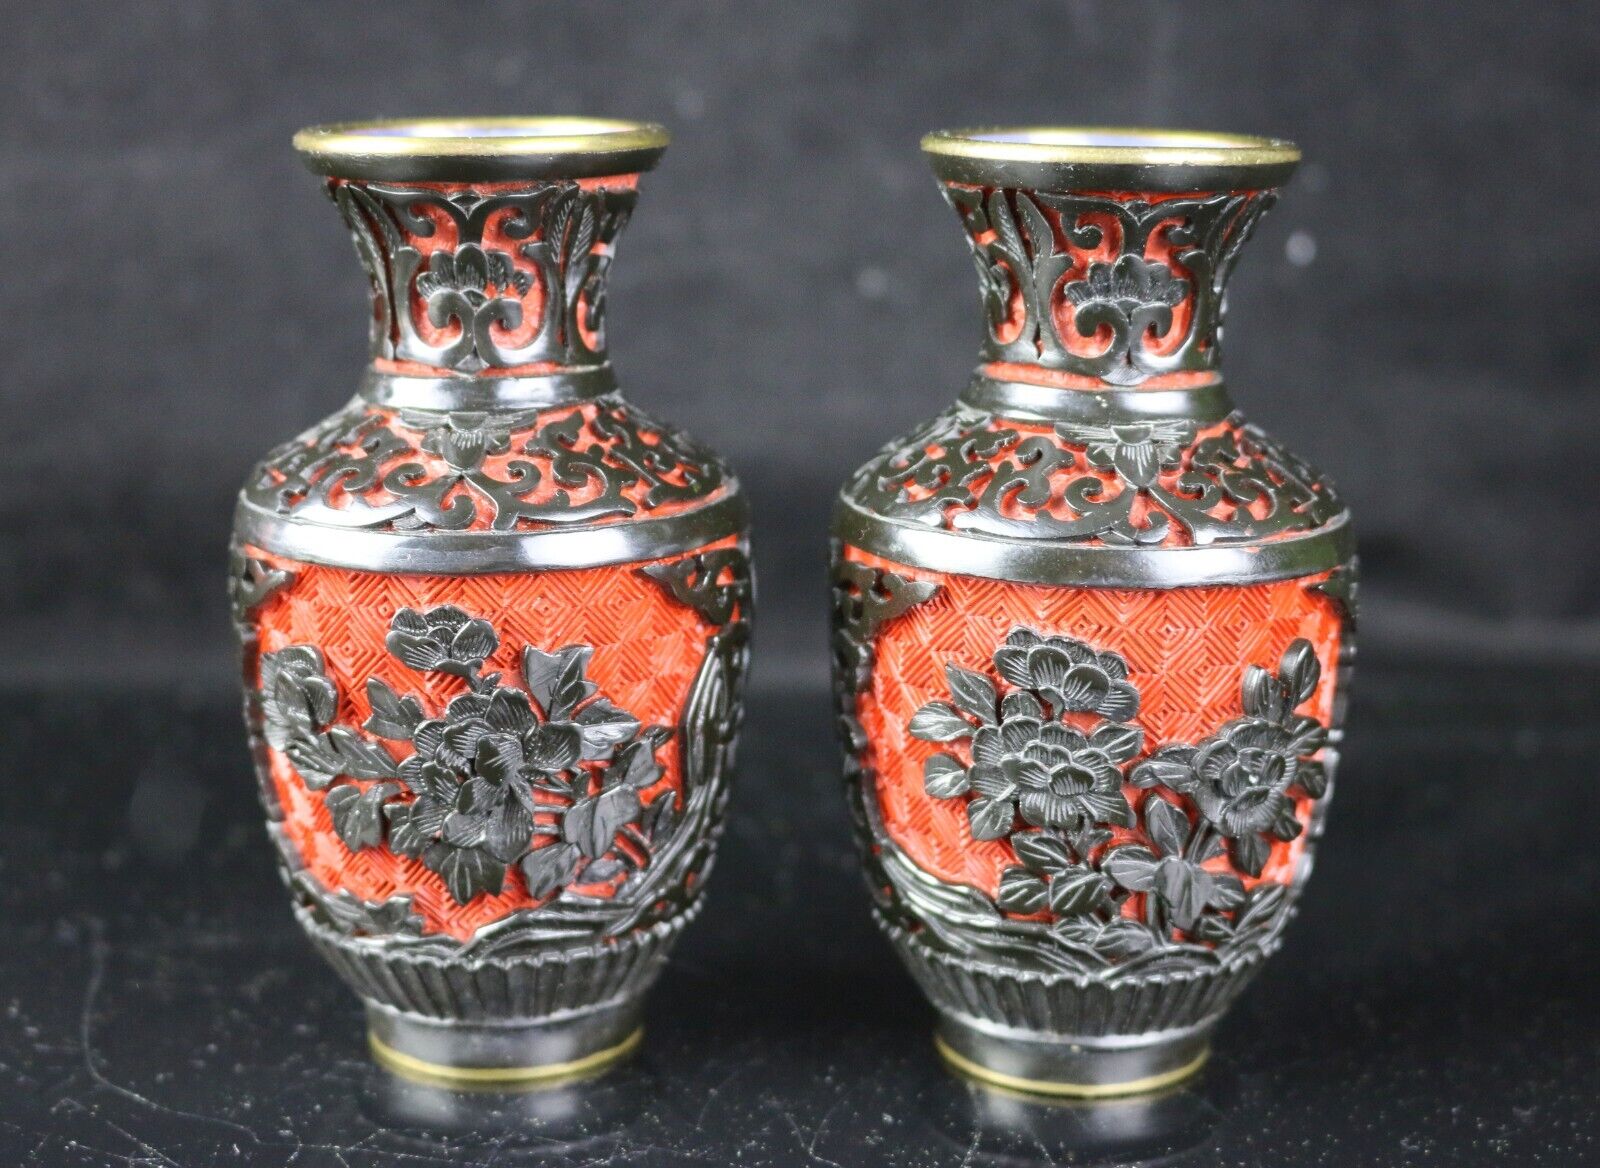 Pair of Vintage Chinese Miniature Black & Red Carved Cinnabar Lacquer Ware Vases